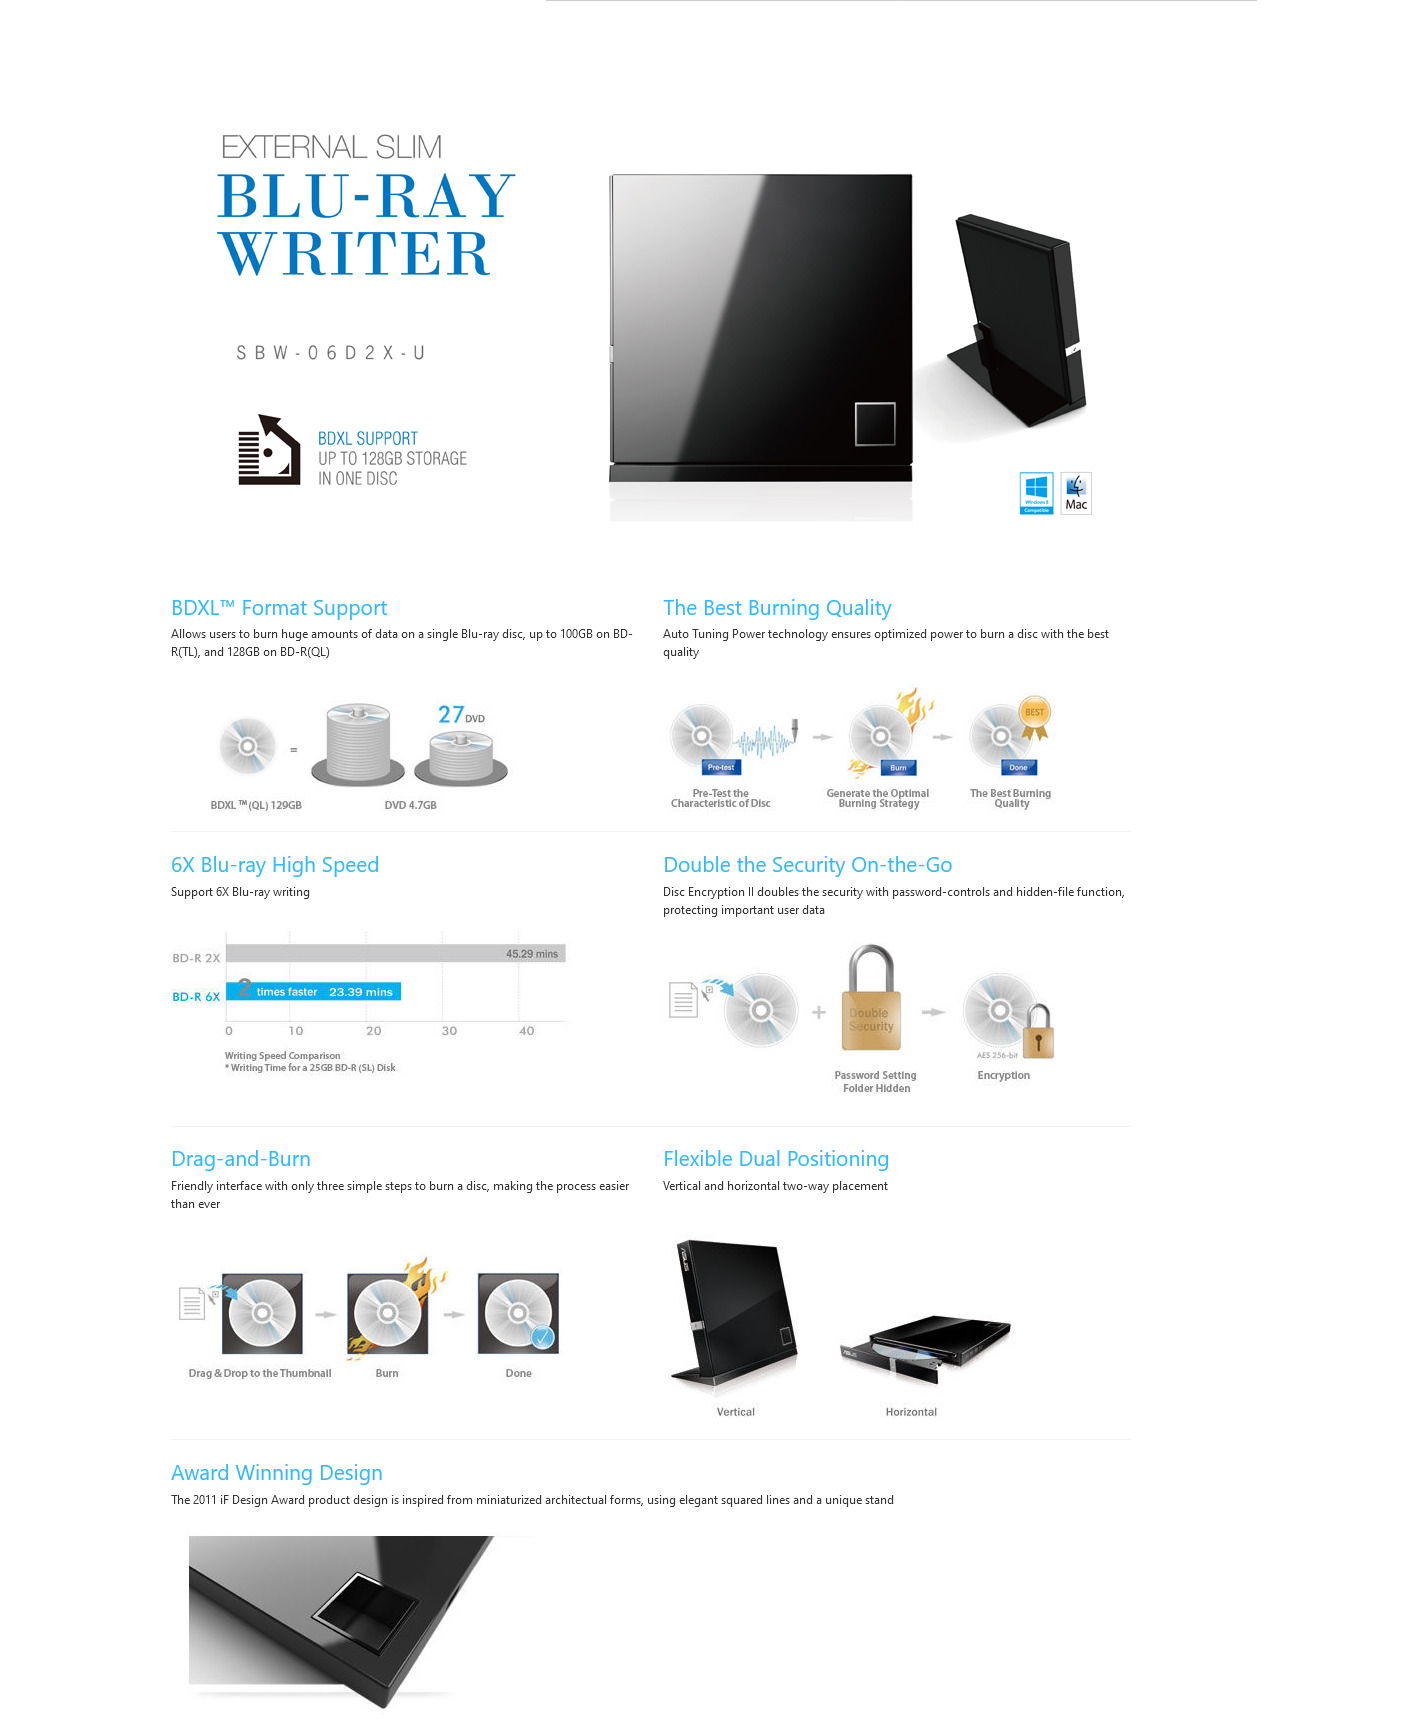 A large marketing image providing additional information about the product ASUS SBW-06D2X-U USB2.0 Slim External Blu-ray Writer - Additional alt info not provided